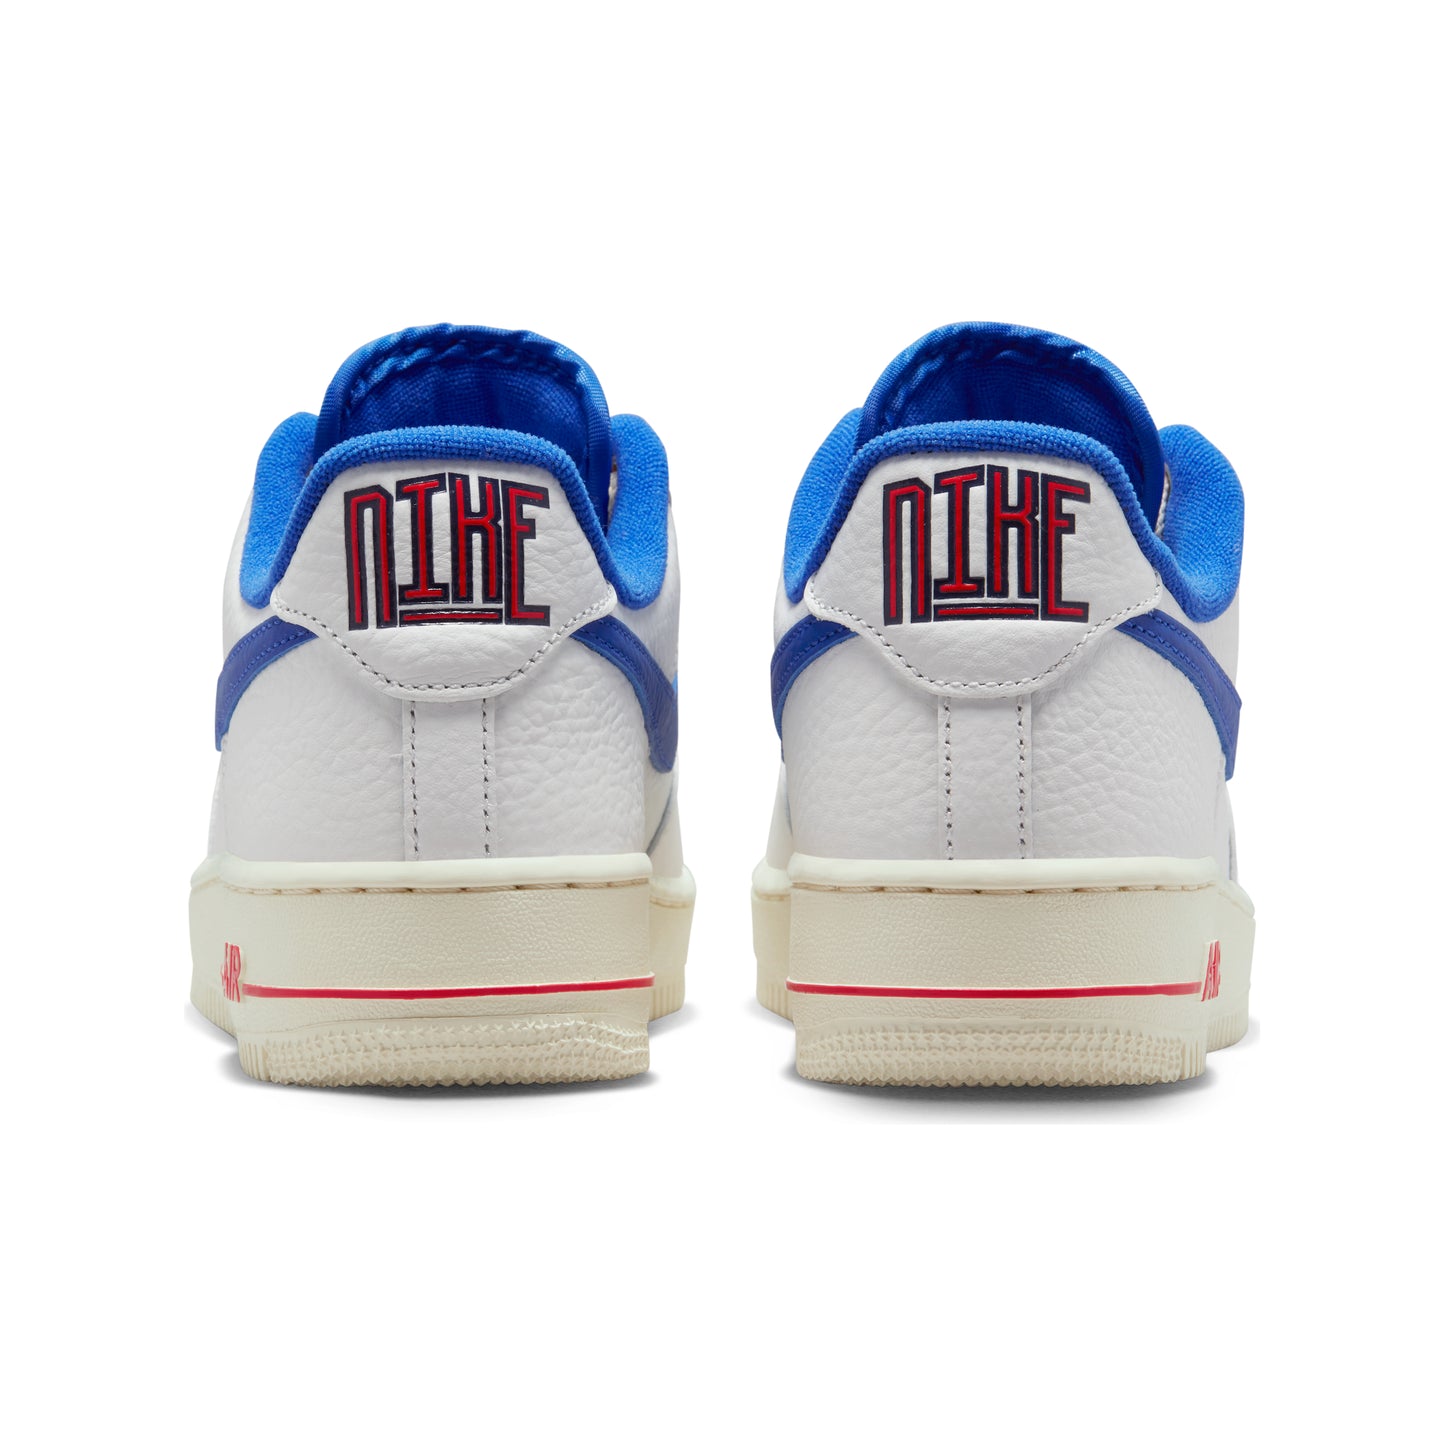 Nike Air Force 1 Low LX Command Force University Blue Summit White